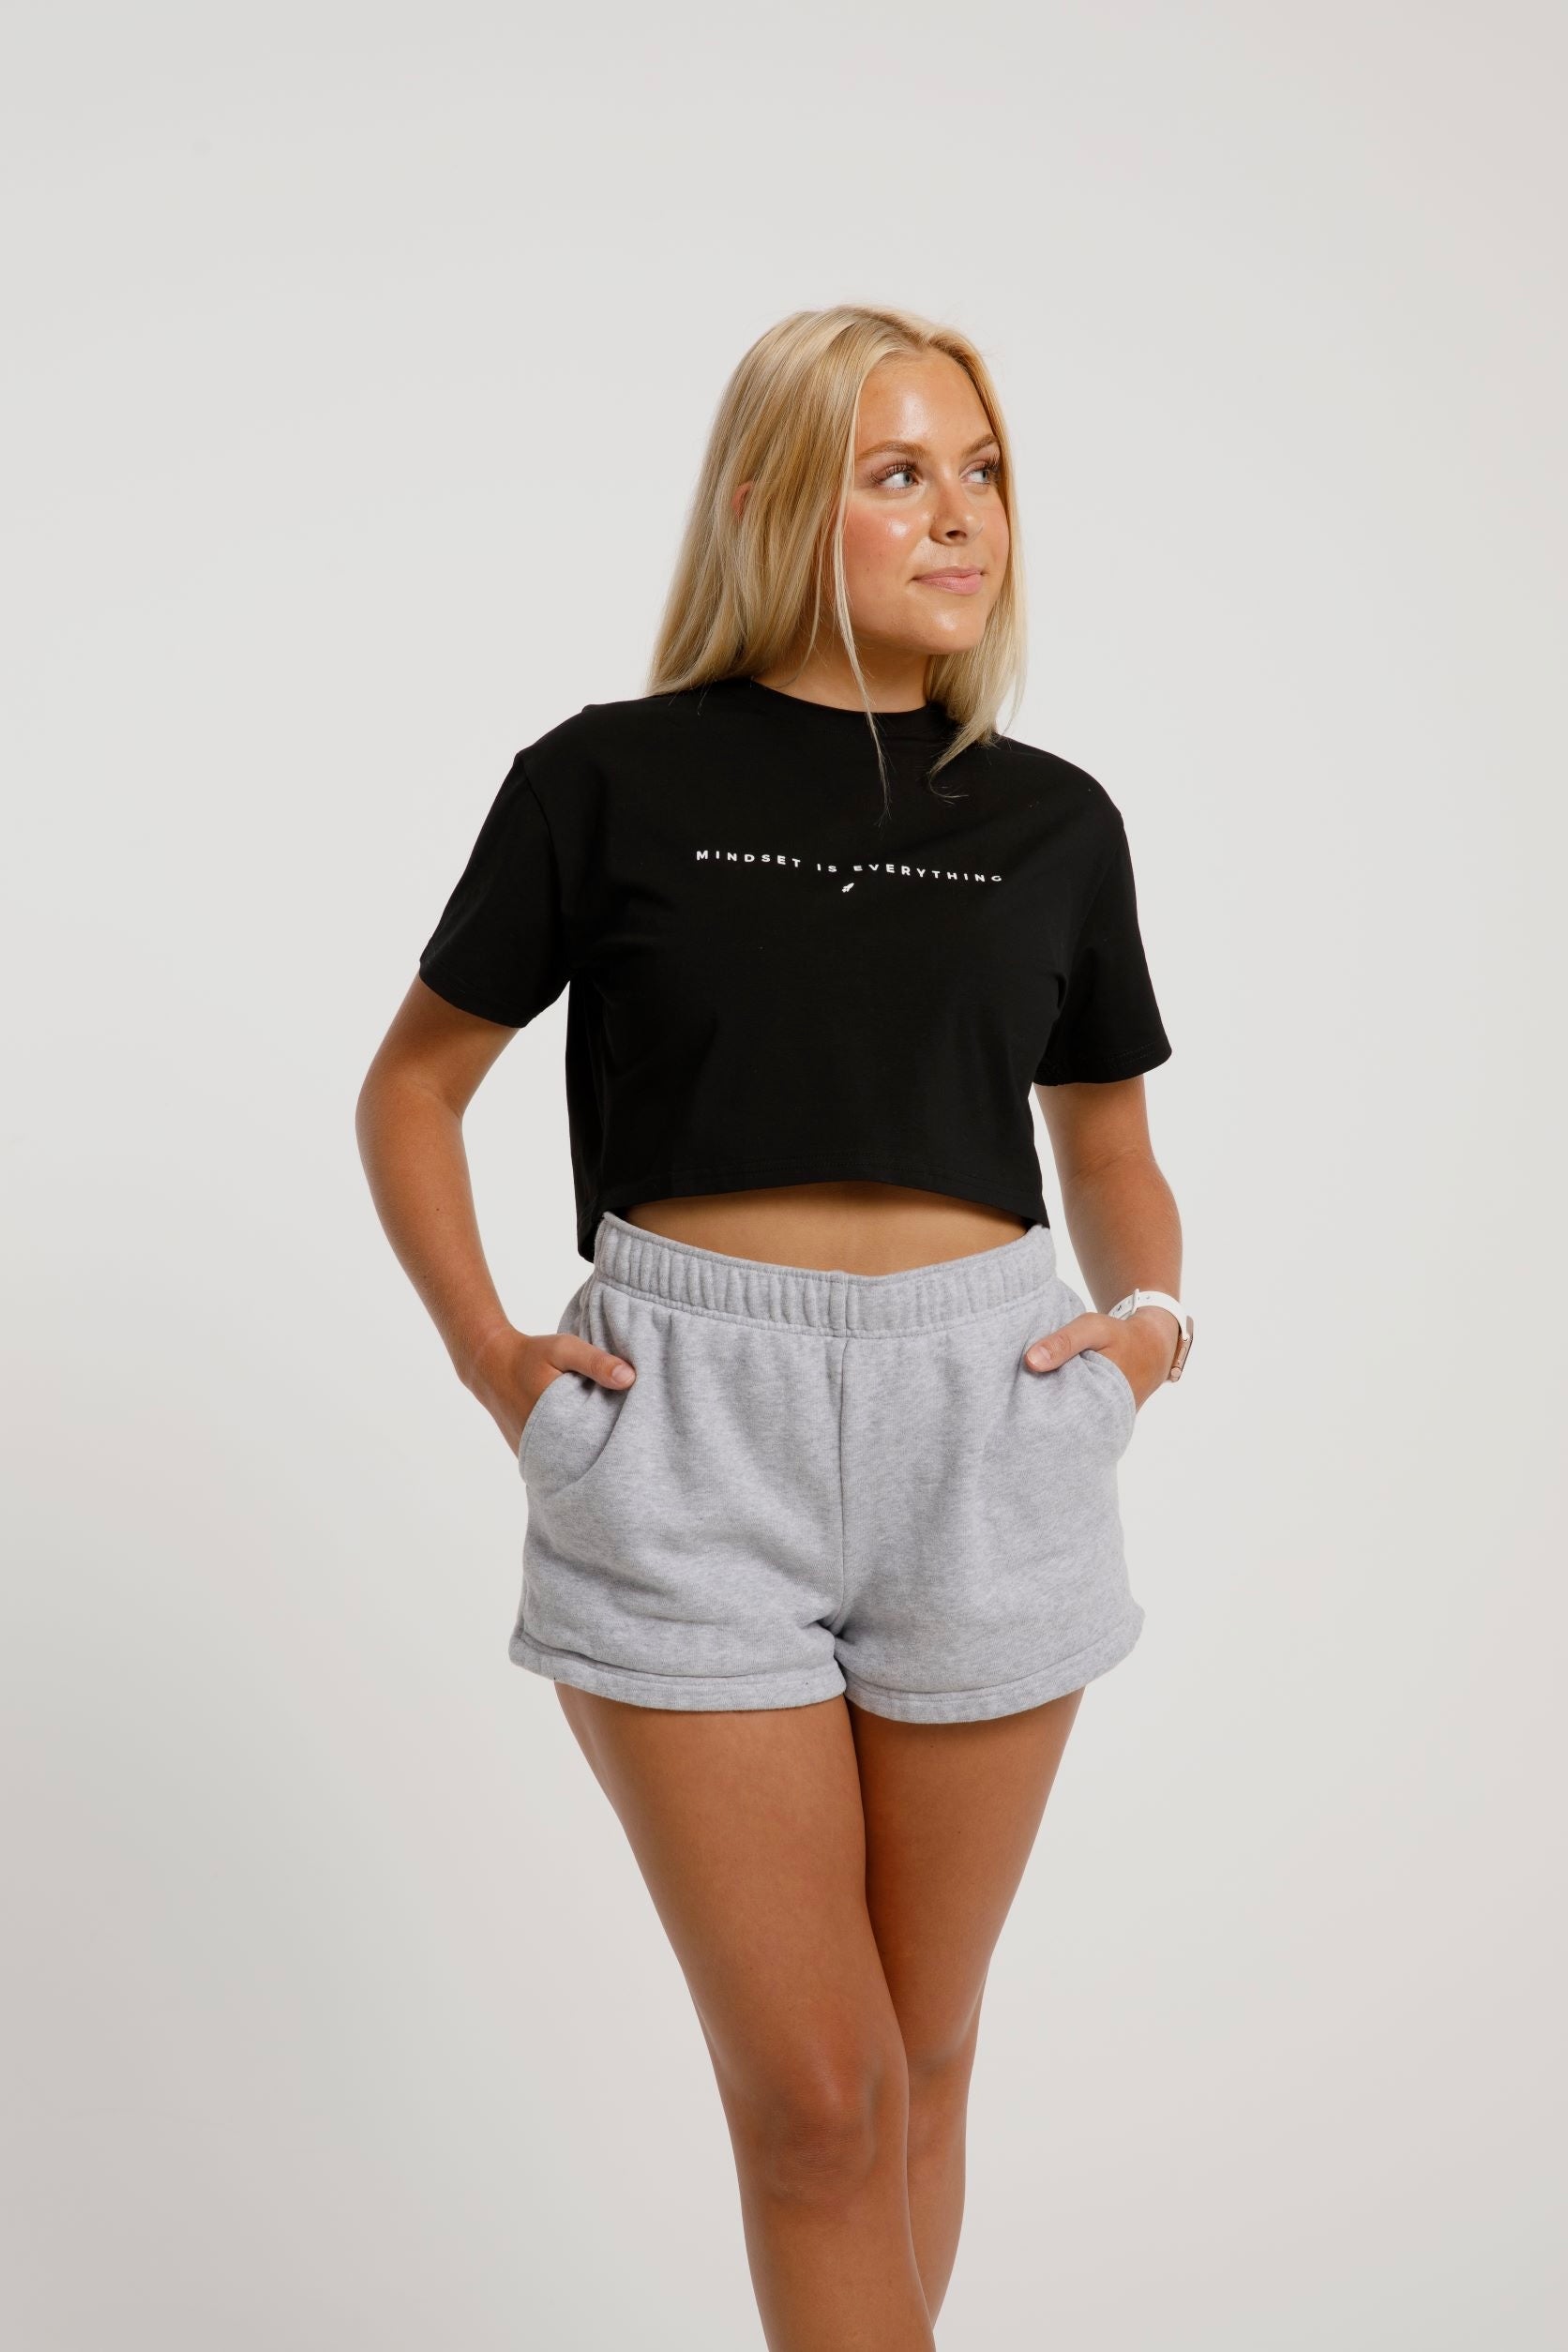 MINDSET IS EVERYTHING CROP TOP